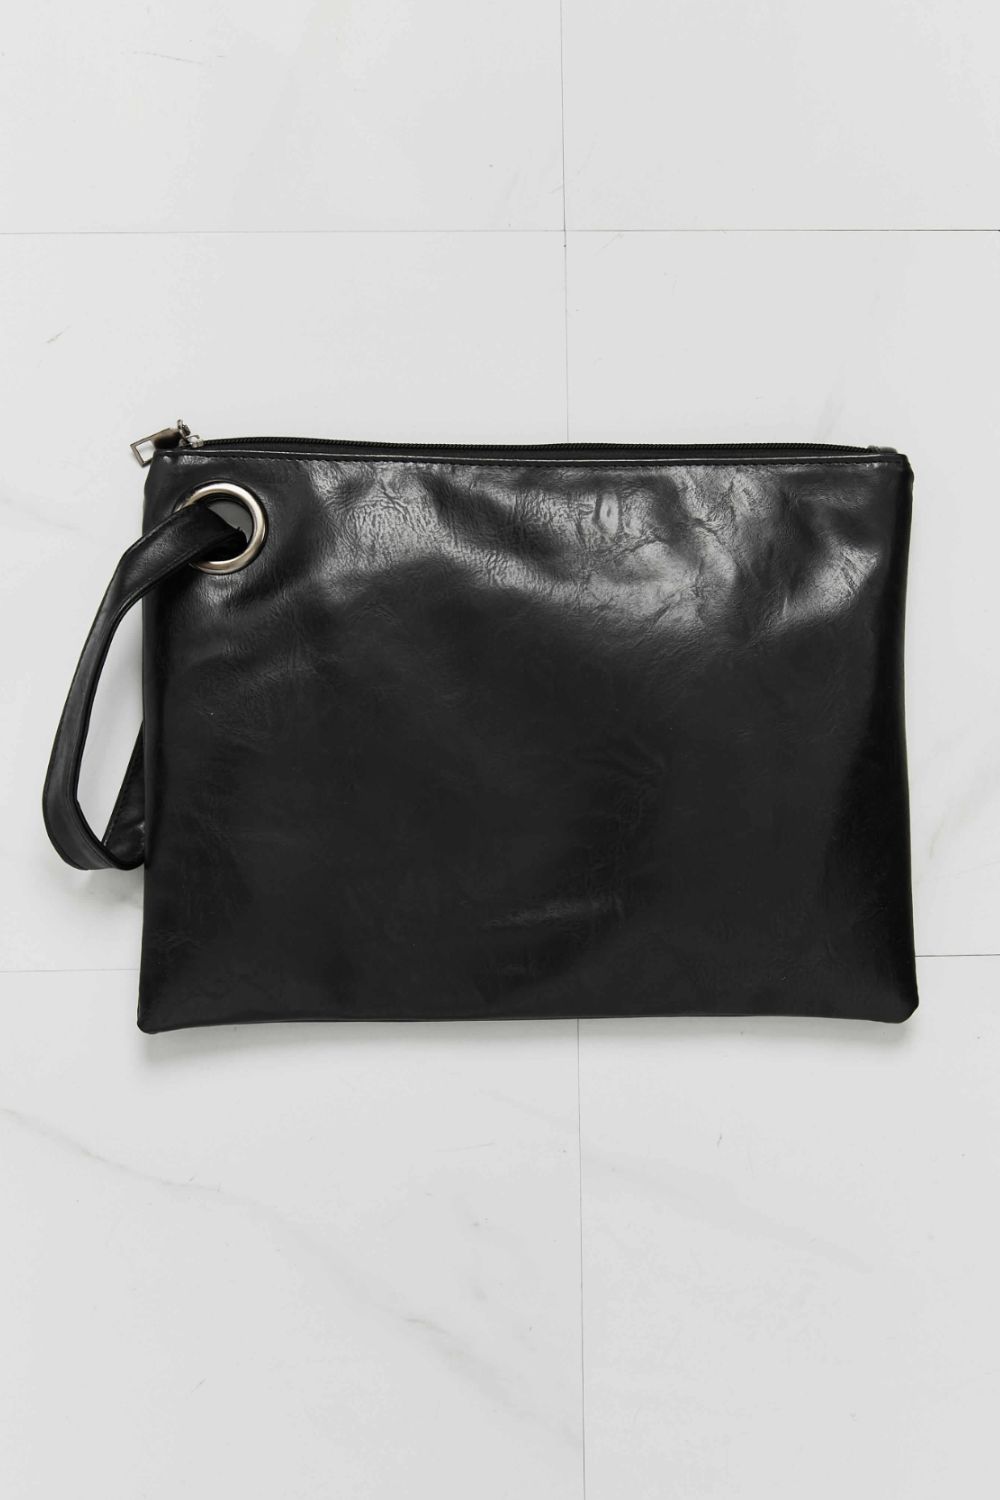 Looking At You PU Leather Wristlet - Handbag - FITGGINS